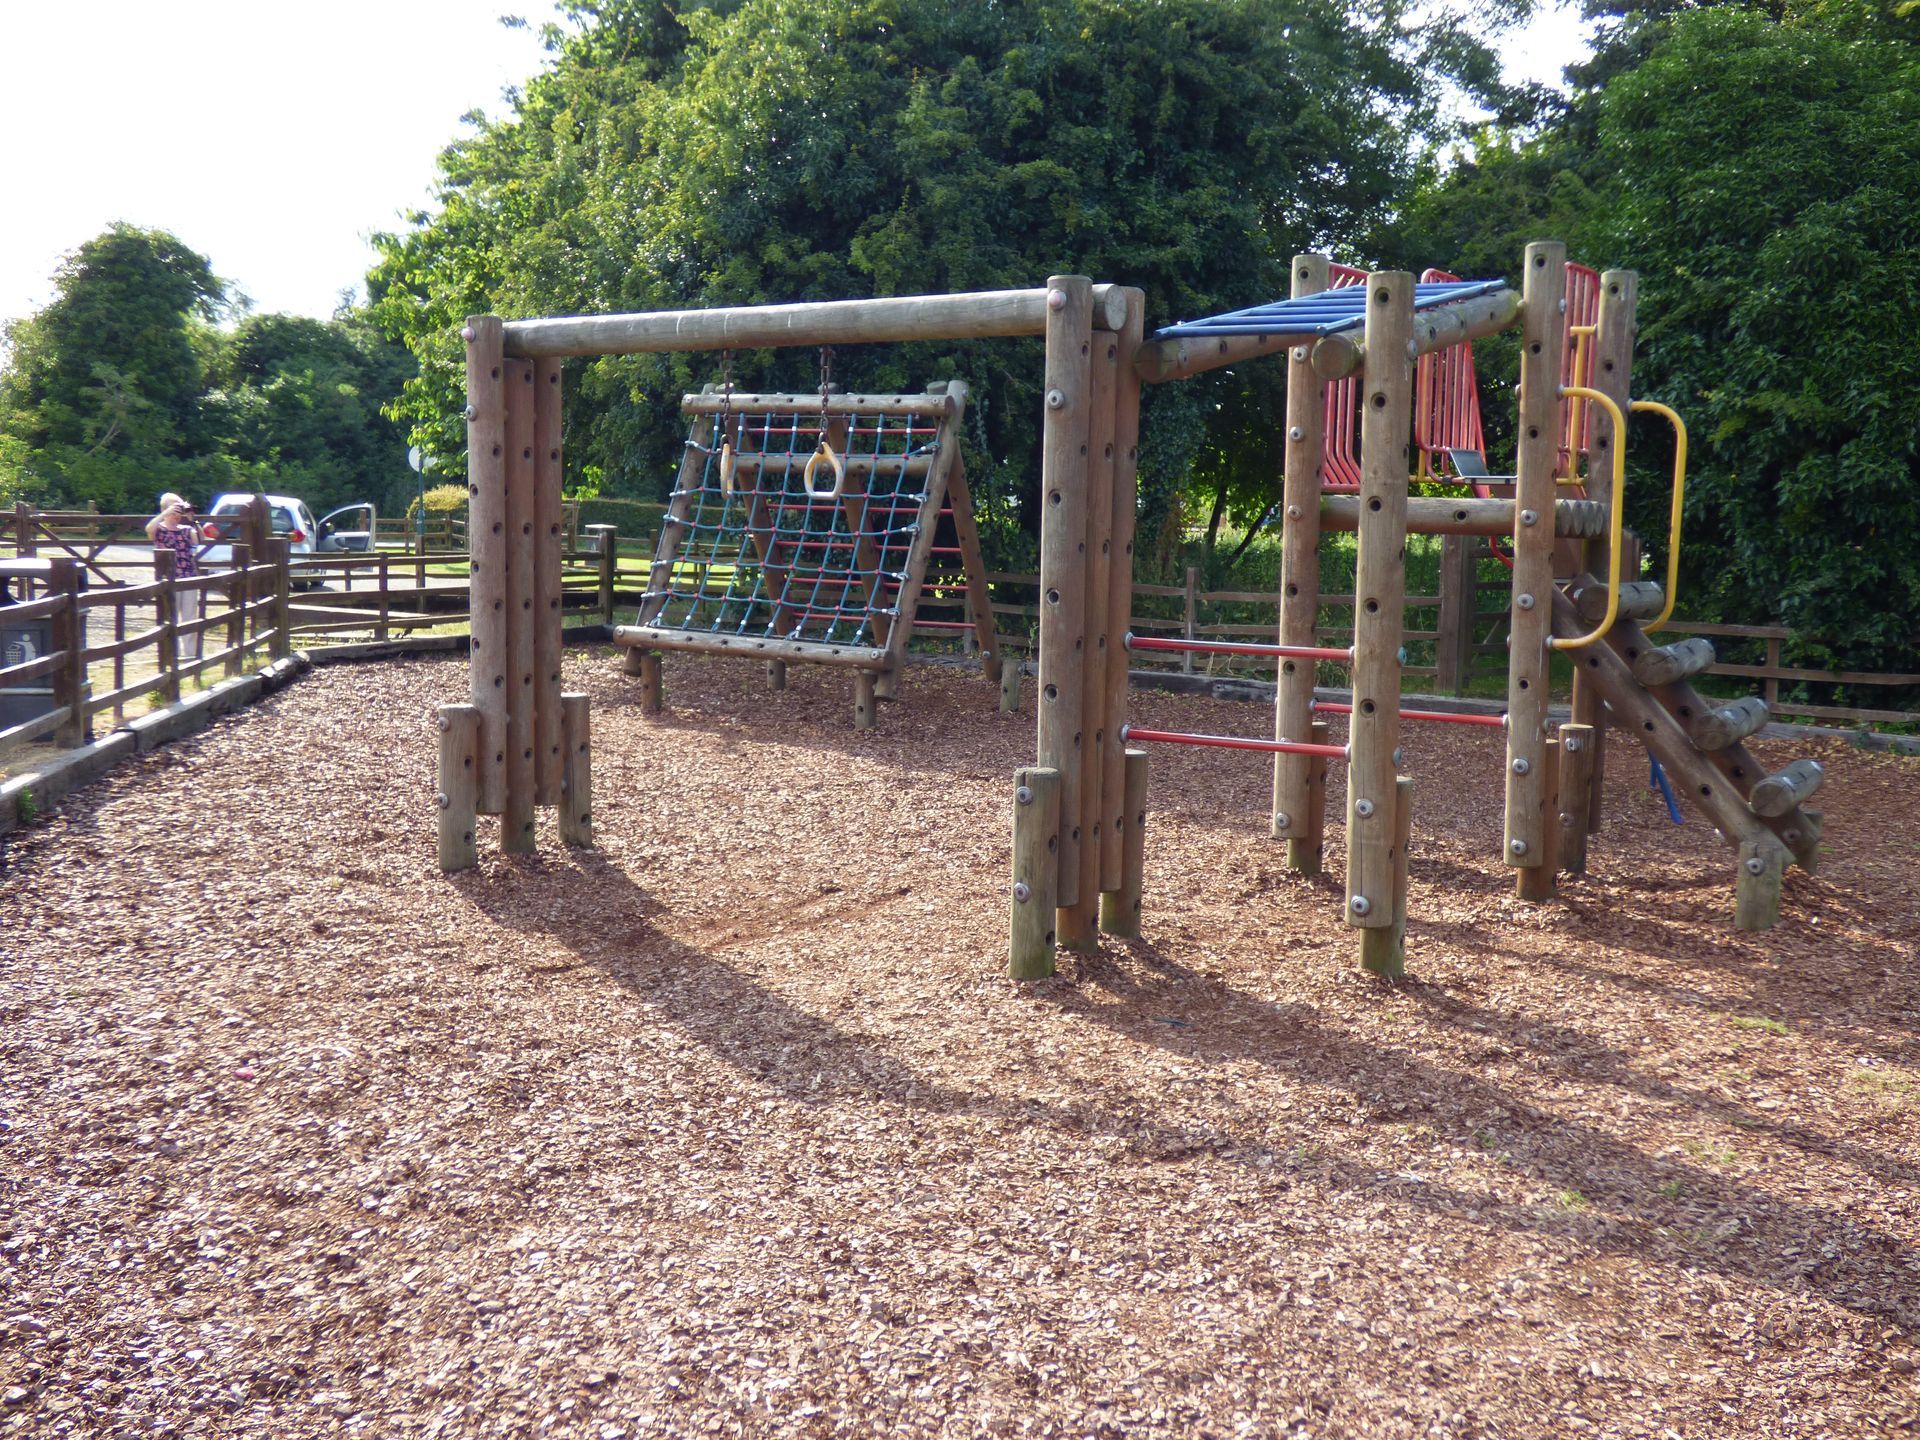 A wooden playground with a swing set and a slide